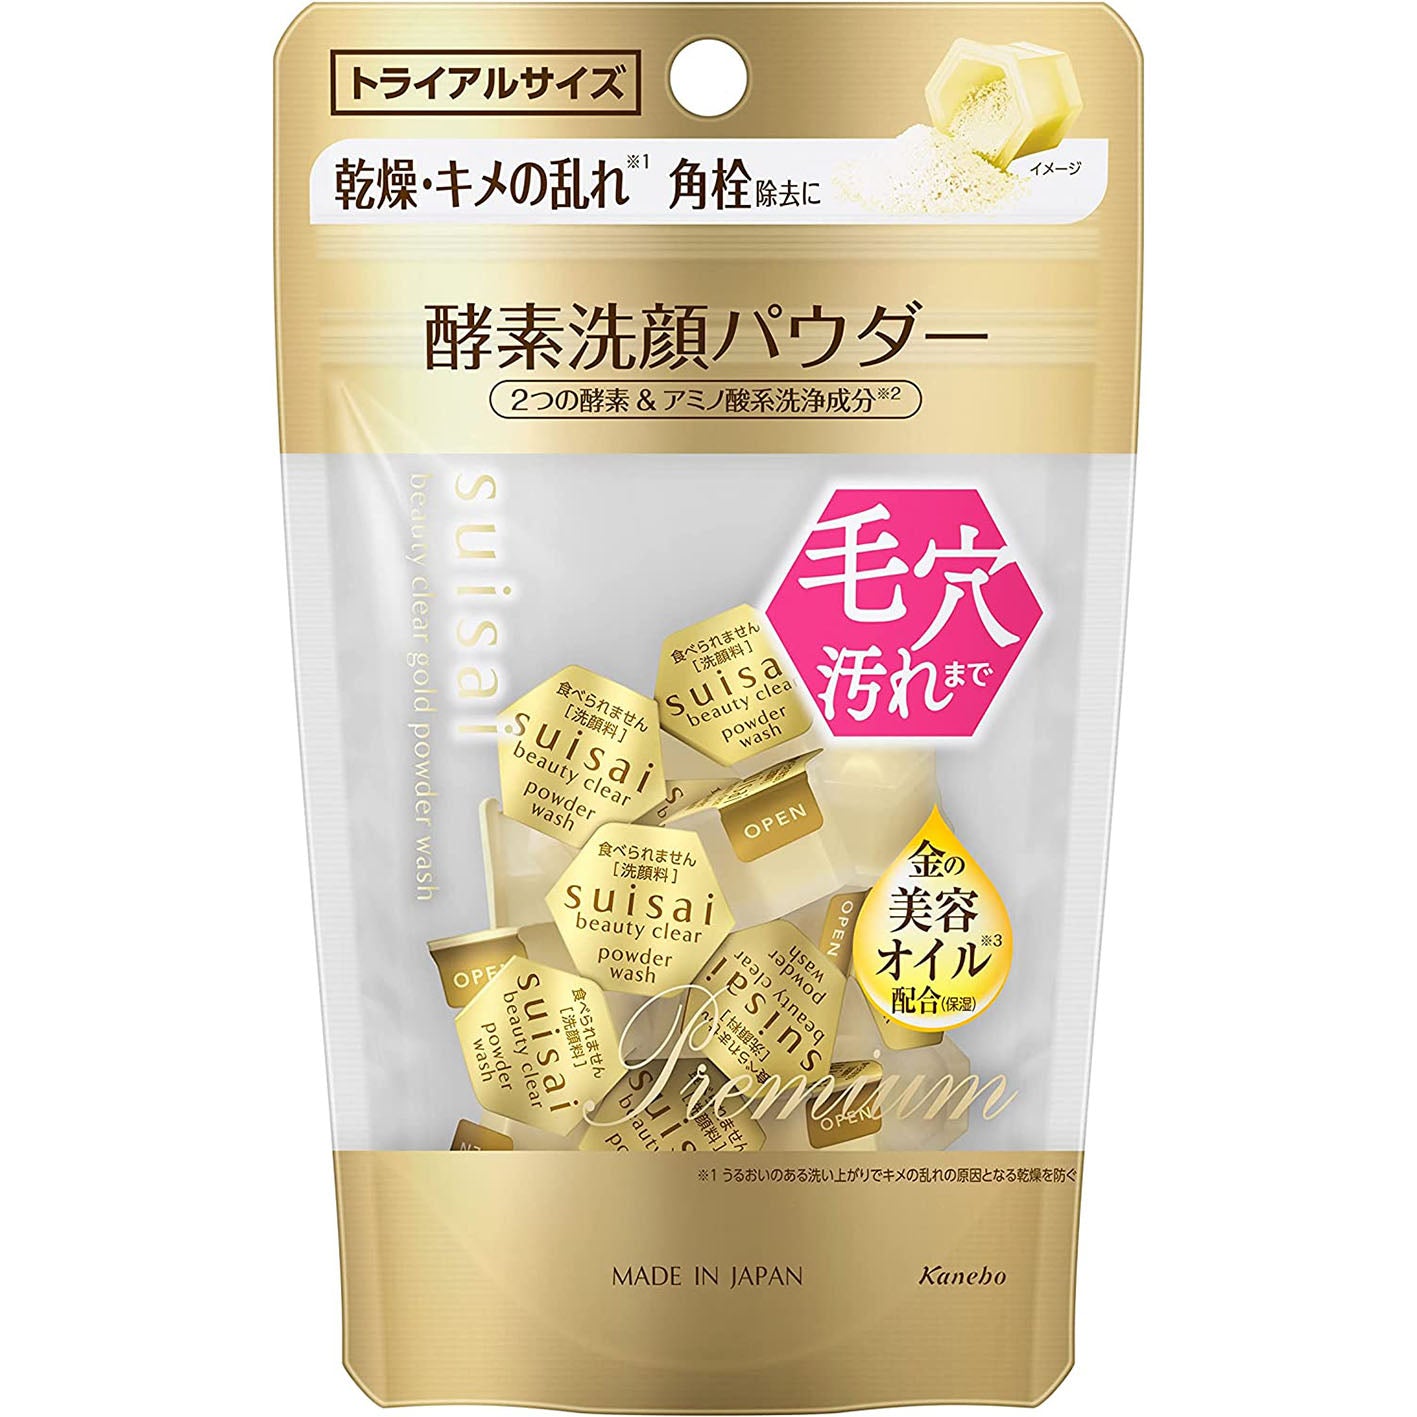 Kanebo Suisai Beauty Clear Gold Powder Wash Enzyme Face Wash Face Wash Powder 0.4g -15 pieces - Harajuku Culture Japan - Japanease Products Store Beauty and Stationery